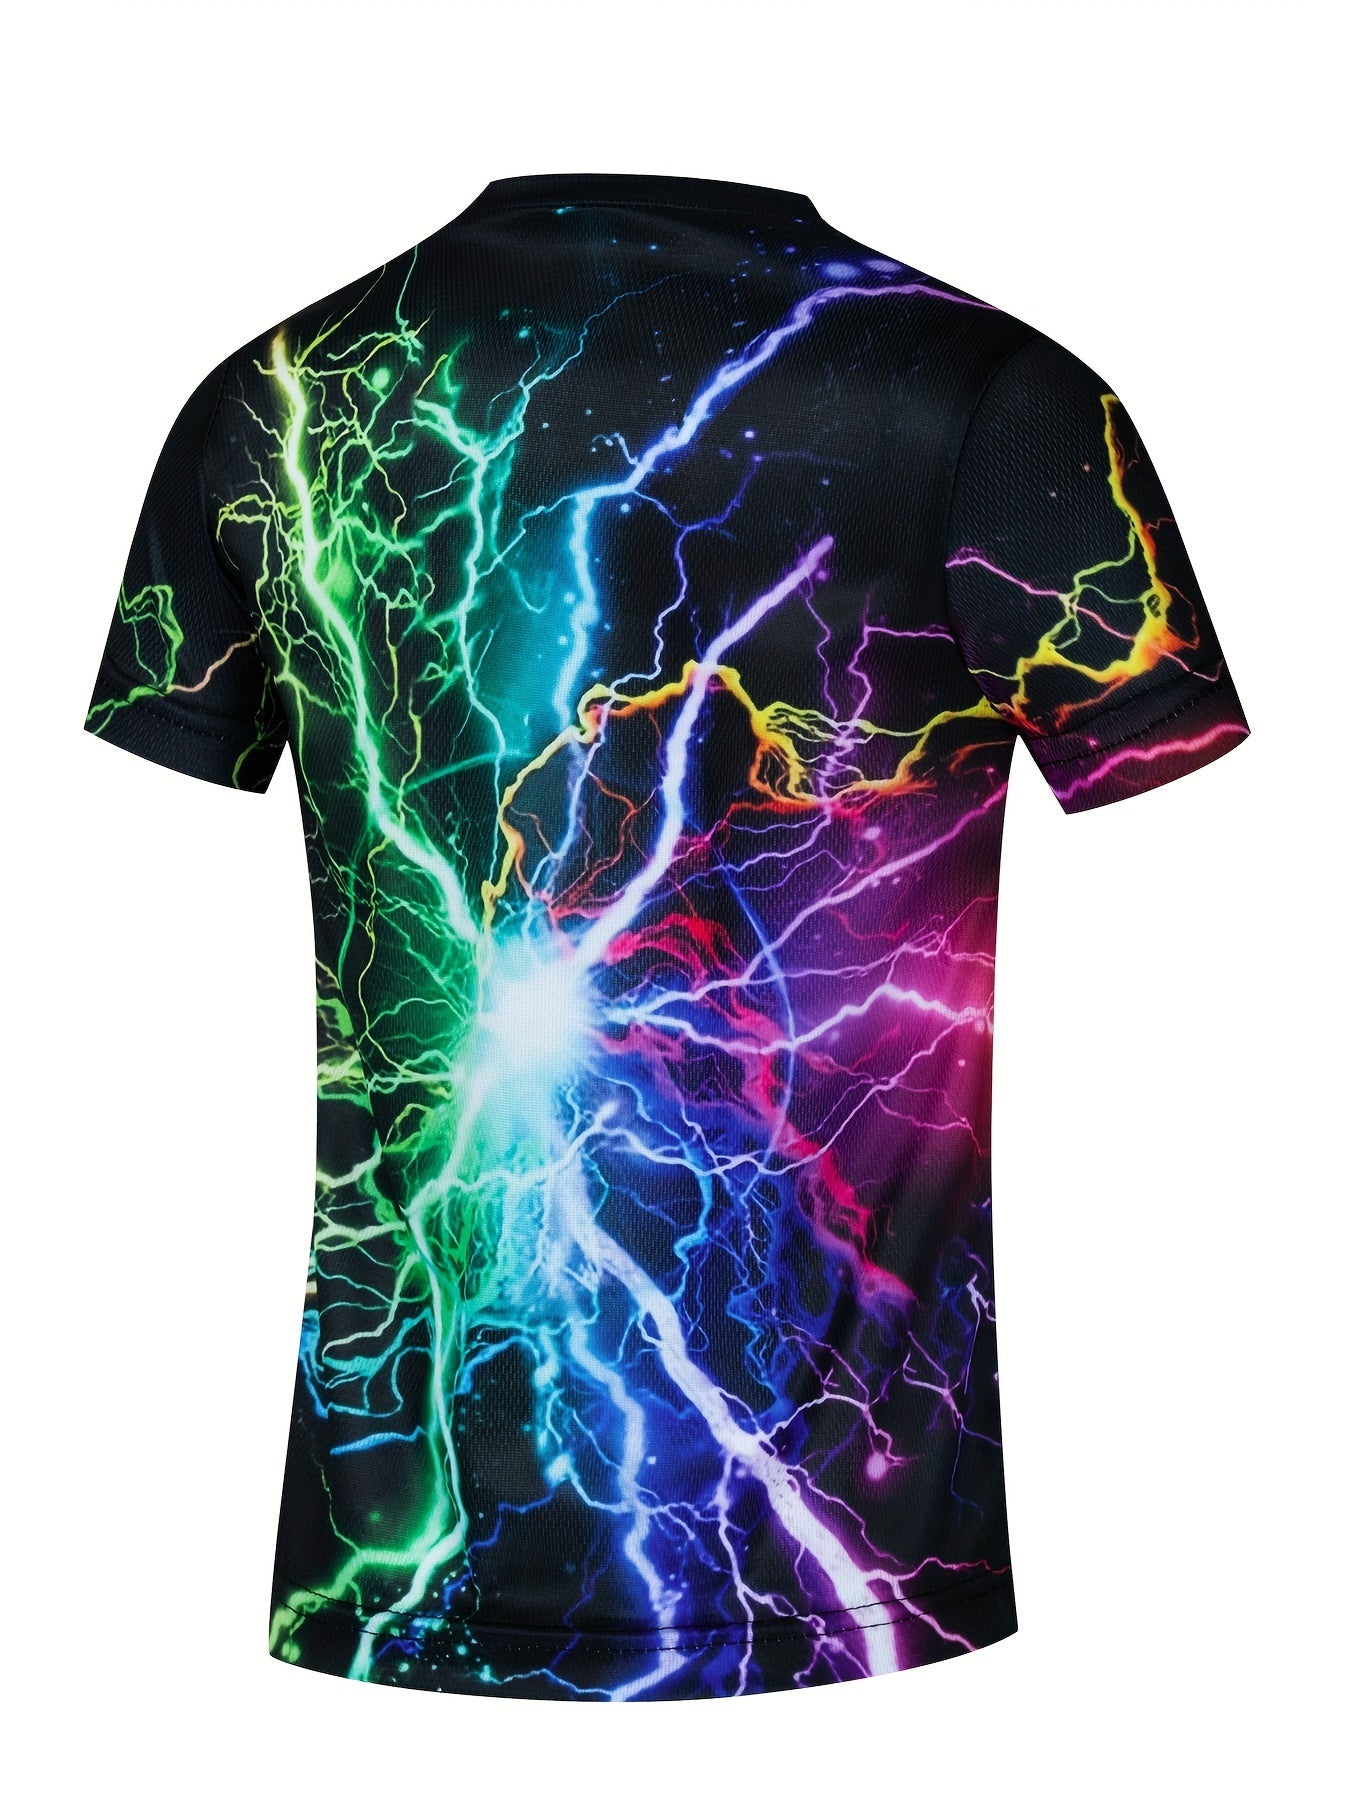 Cool & Colorful Lightning Graphic T-Shirts for Kids - Perfect for Summer Outdoors!